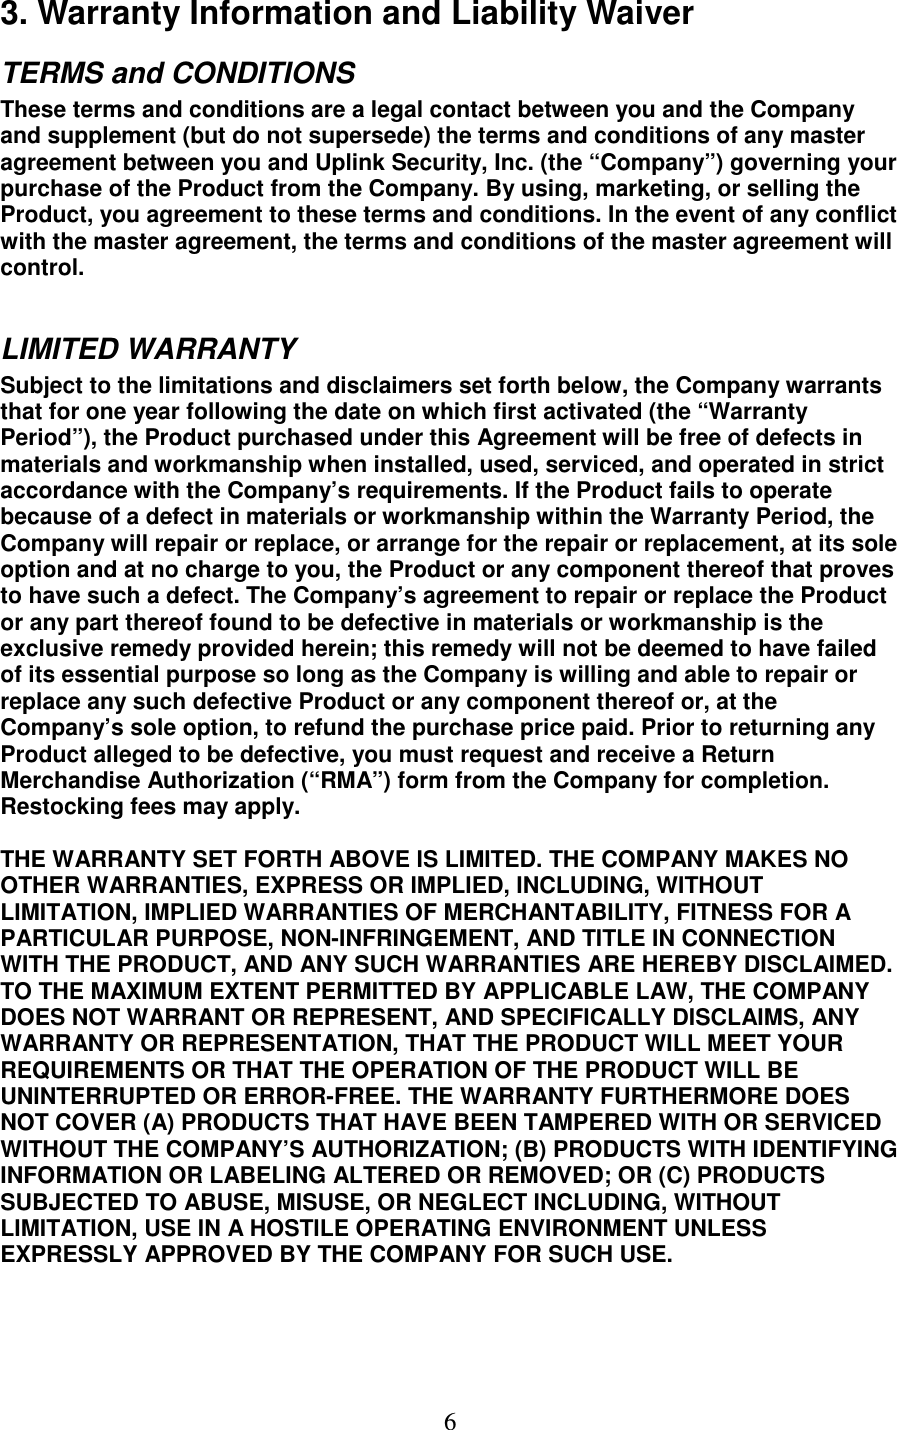   6 3. Warranty Information and Liability Waiver TERMS and CONDITIONS  These terms and conditions are a legal contact between you and the Company and supplement (but do not supersede) the terms and conditions of any master agreement between you and Uplink Security, Inc. (the “Company”) governing your purchase of the Product from the Company. By using, marketing, or selling the Product, you agreement to these terms and conditions. In the event of any conflict with the master agreement, the terms and conditions of the master agreement will control.   LIMITED WARRANTY  Subject to the limitations and disclaimers set forth below, the Company warrants that for one year following the date on which first activated (the “Warranty Period”), the Product purchased under this Agreement will be free of defects in materials and workmanship when installed, used, serviced, and operated in strict accordance with the Company’s requirements. If the Product fails to operate because of a defect in materials or workmanship within the Warranty Period, the Company will repair or replace, or arrange for the repair or replacement, at its sole option and at no charge to you, the Product or any component thereof that proves to have such a defect. The Company’s agreement to repair or replace the Product or any part thereof found to be defective in materials or workmanship is the exclusive remedy provided herein; this remedy will not be deemed to have failed of its essential purpose so long as the Company is willing and able to repair or replace any such defective Product or any component thereof or, at the Company’s sole option, to refund the purchase price paid. Prior to returning any Product alleged to be defective, you must request and receive a Return Merchandise Authorization (“RMA”) form from the Company for completion. Restocking fees may apply.   THE WARRANTY SET FORTH ABOVE IS LIMITED. THE COMPANY MAKES NO OTHER WARRANTIES, EXPRESS OR IMPLIED, INCLUDING, WITHOUT LIMITATION, IMPLIED WARRANTIES OF MERCHANTABILITY, FITNESS FOR A PARTICULAR PURPOSE, NON-INFRINGEMENT, AND TITLE IN CONNECTION WITH THE PRODUCT, AND ANY SUCH WARRANTIES ARE HEREBY DISCLAIMED. TO THE MAXIMUM EXTENT PERMITTED BY APPLICABLE LAW, THE COMPANY DOES NOT WARRANT OR REPRESENT, AND SPECIFICALLY DISCLAIMS, ANY WARRANTY OR REPRESENTATION, THAT THE PRODUCT WILL MEET YOUR REQUIREMENTS OR THAT THE OPERATION OF THE PRODUCT WILL BE UNINTERRUPTED OR ERROR-FREE. THE WARRANTY FURTHERMORE DOES NOT COVER (A) PRODUCTS THAT HAVE BEEN TAMPERED WITH OR SERVICED WITHOUT THE COMPANY’S AUTHORIZATION; (B) PRODUCTS WITH IDENTIFYING INFORMATION OR LABELING ALTERED OR REMOVED; OR (C) PRODUCTS SUBJECTED TO ABUSE, MISUSE, OR NEGLECT INCLUDING, WITHOUT LIMITATION, USE IN A HOSTILE OPERATING ENVIRONMENT UNLESS EXPRESSLY APPROVED BY THE COMPANY FOR SUCH USE.   